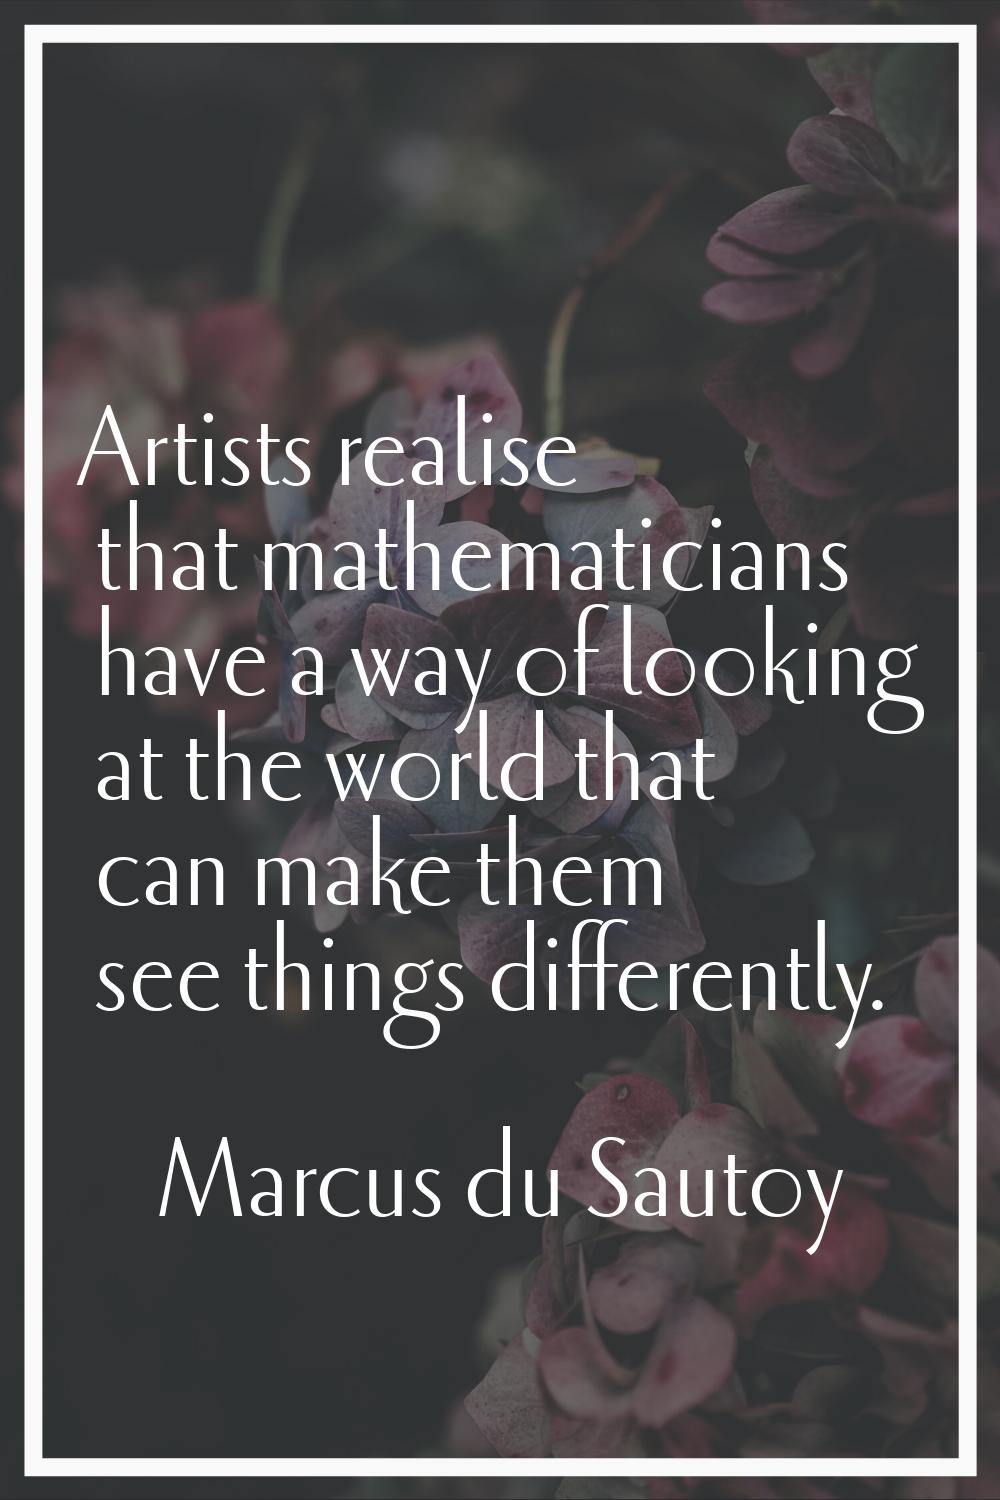 Artists realise that mathematicians have a way of looking at the world that can make them see thing